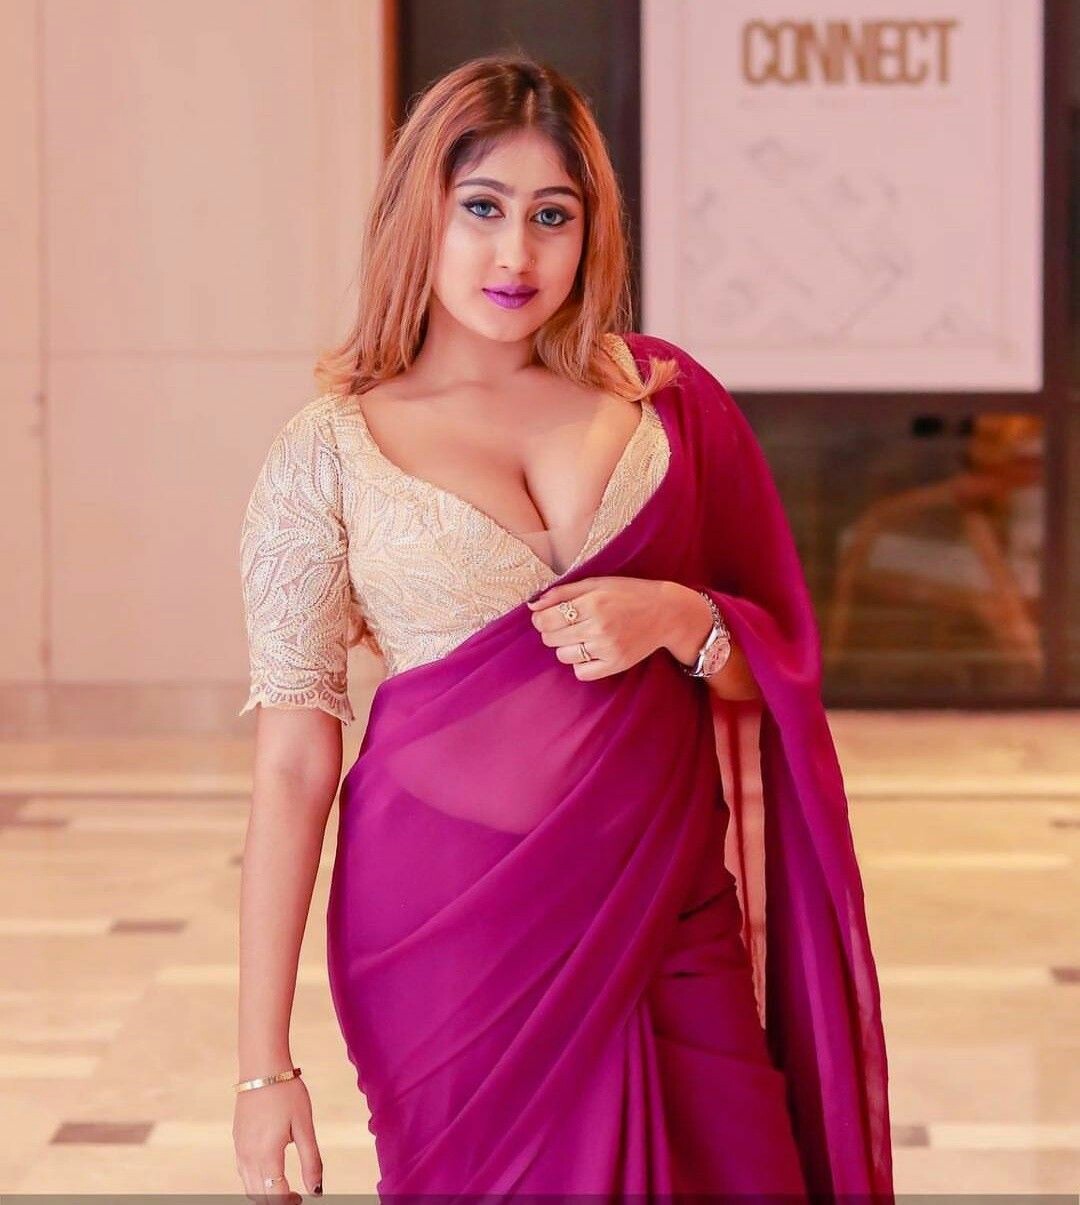 Amazing Indian Women In Saree Greatest Photo Gallery